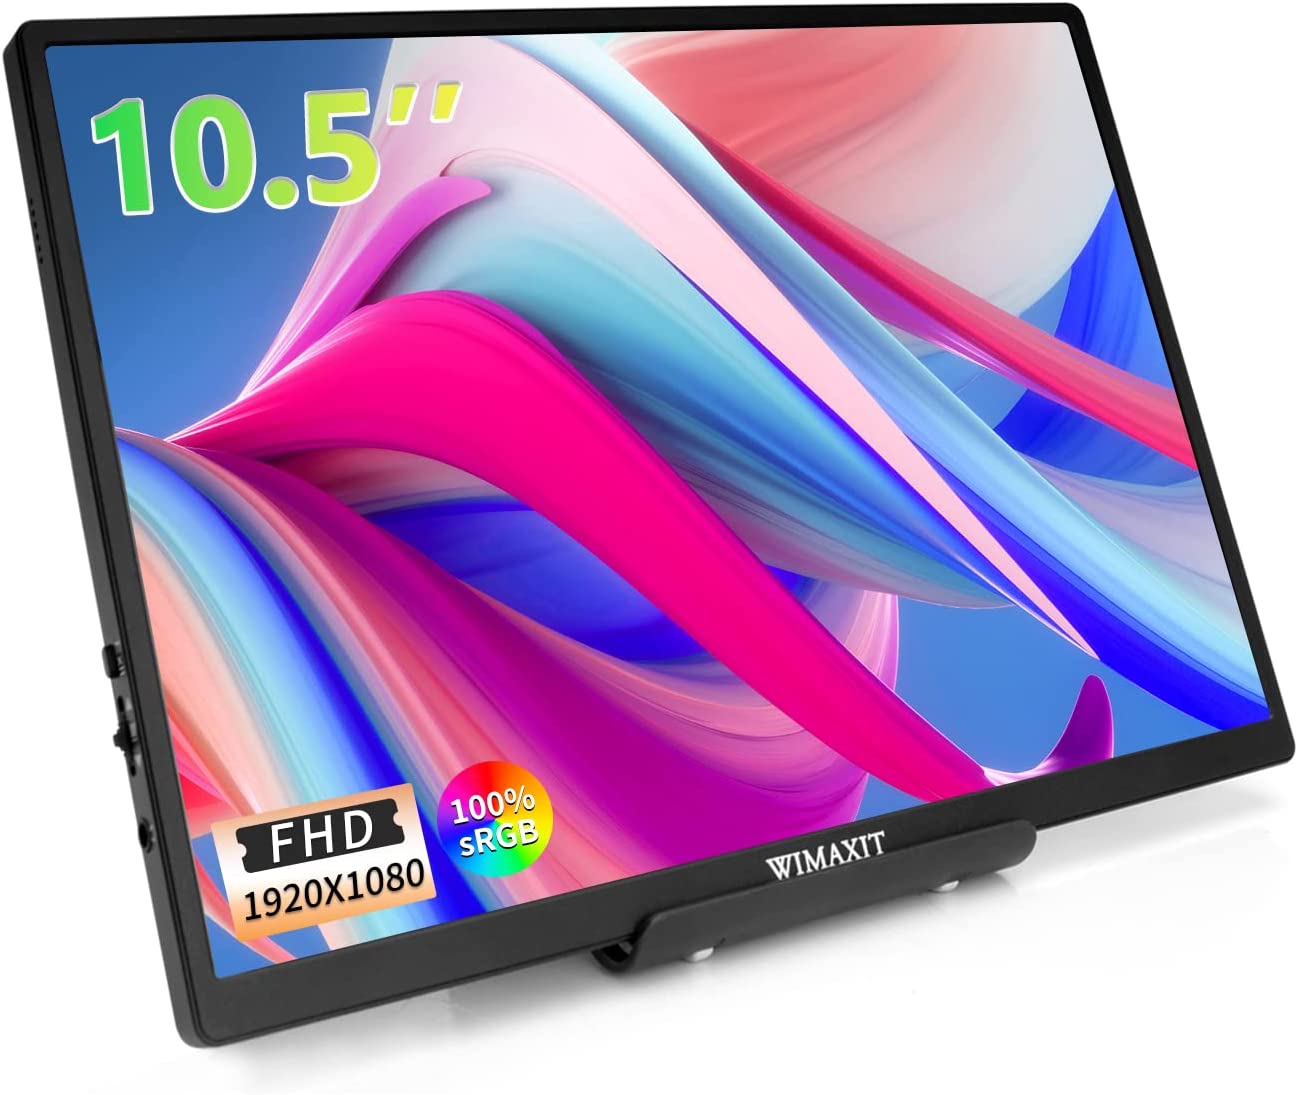 WIMAXIT 10.1 inch Portable Laptop Monitor 100% SRGB [...]